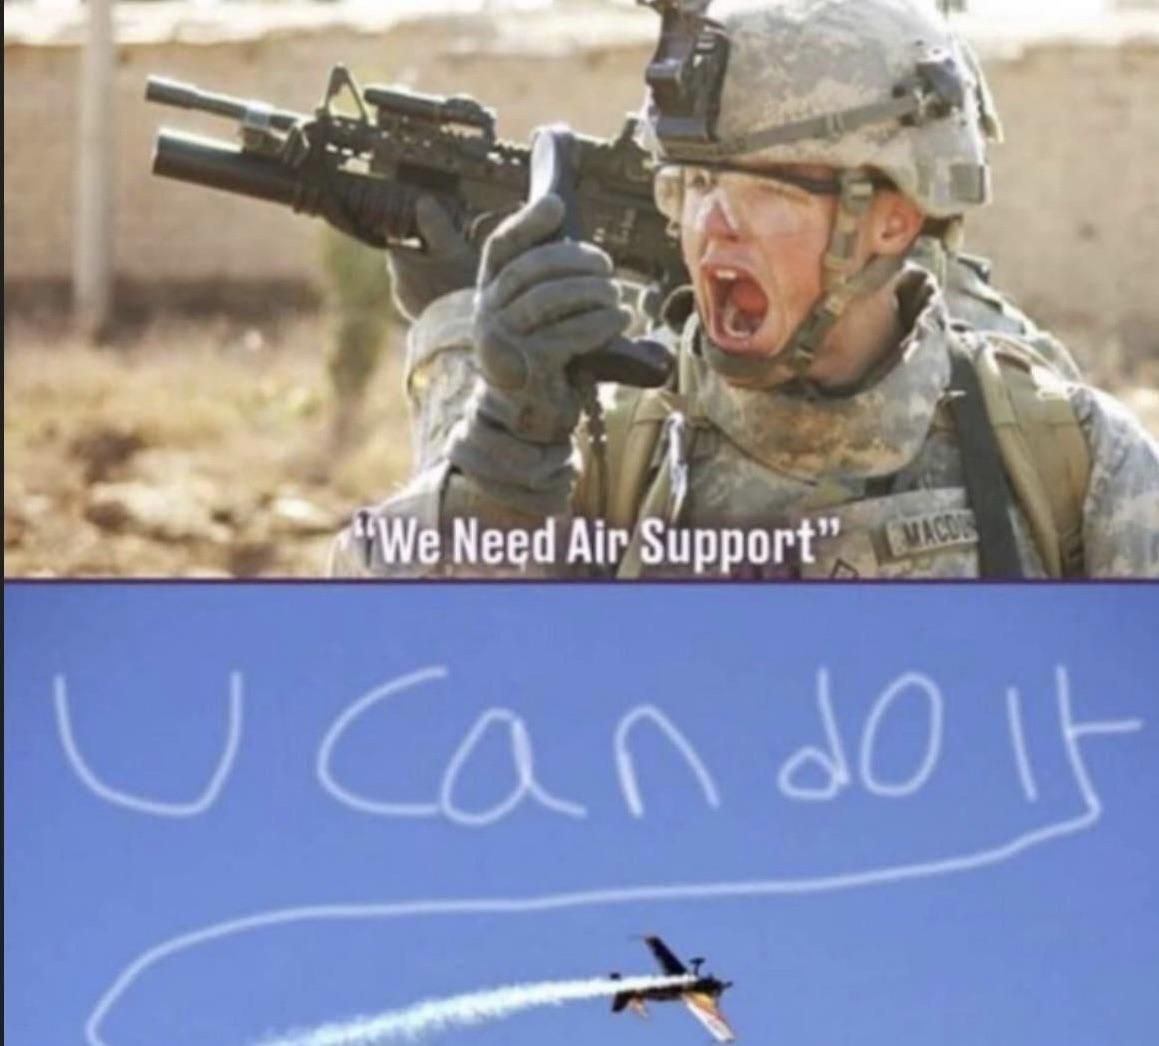 Technically it is air support…